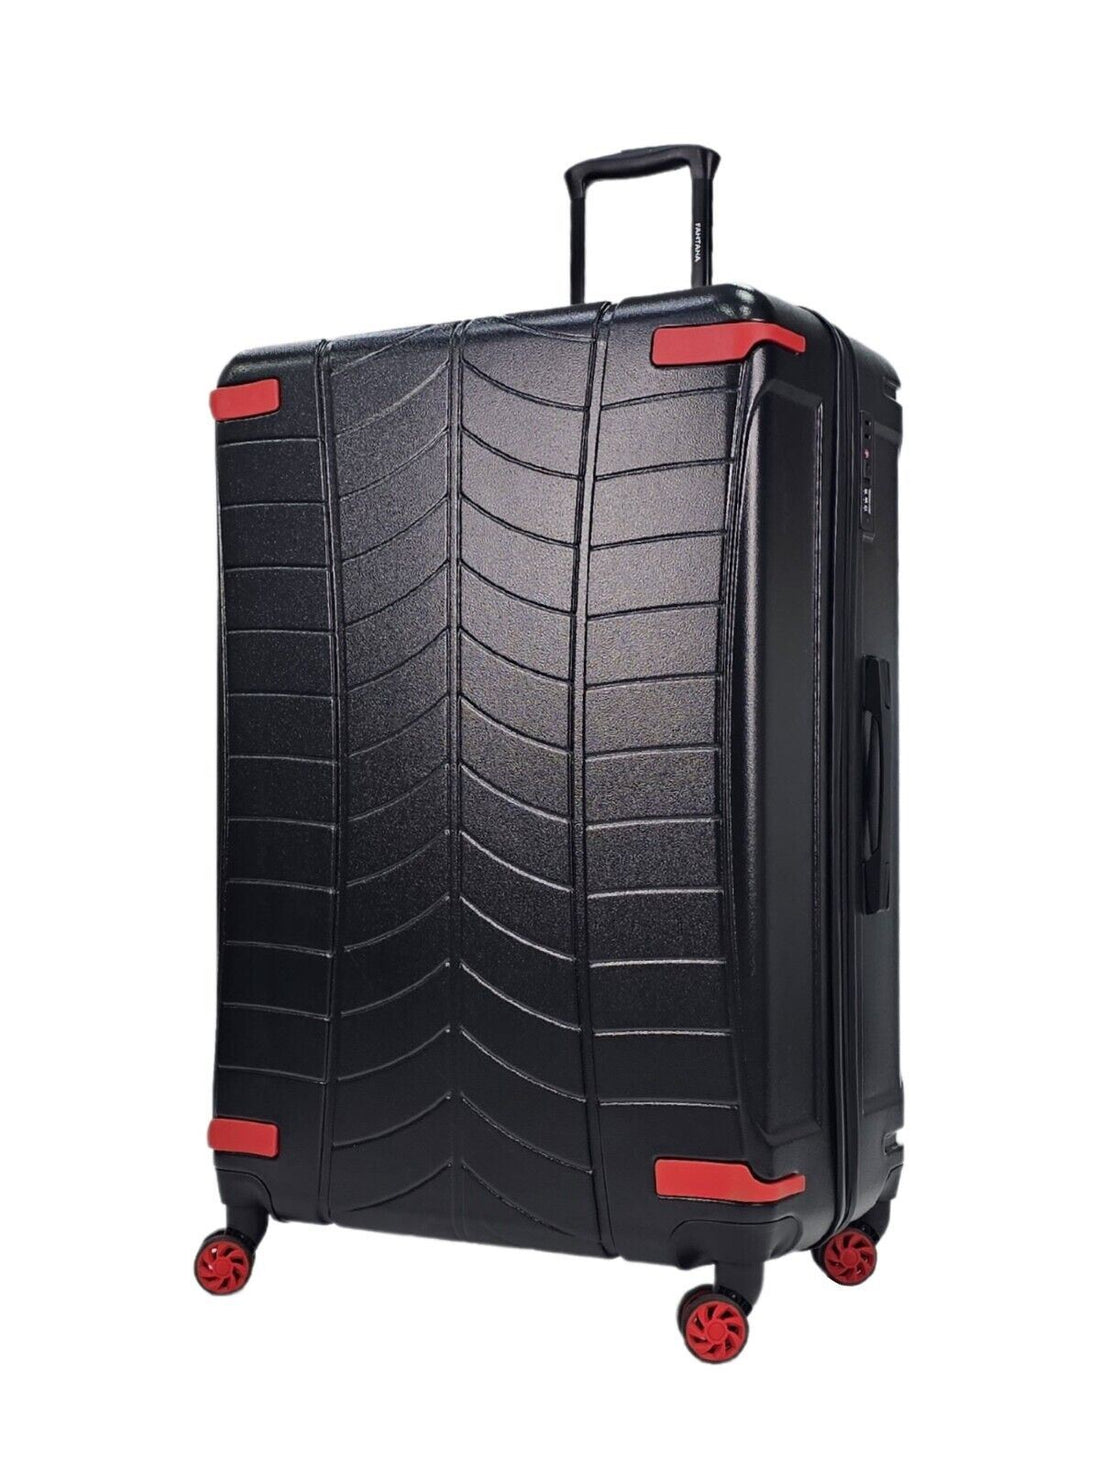 Bynum Double Extra Large Hard Shell Suitcase in Black